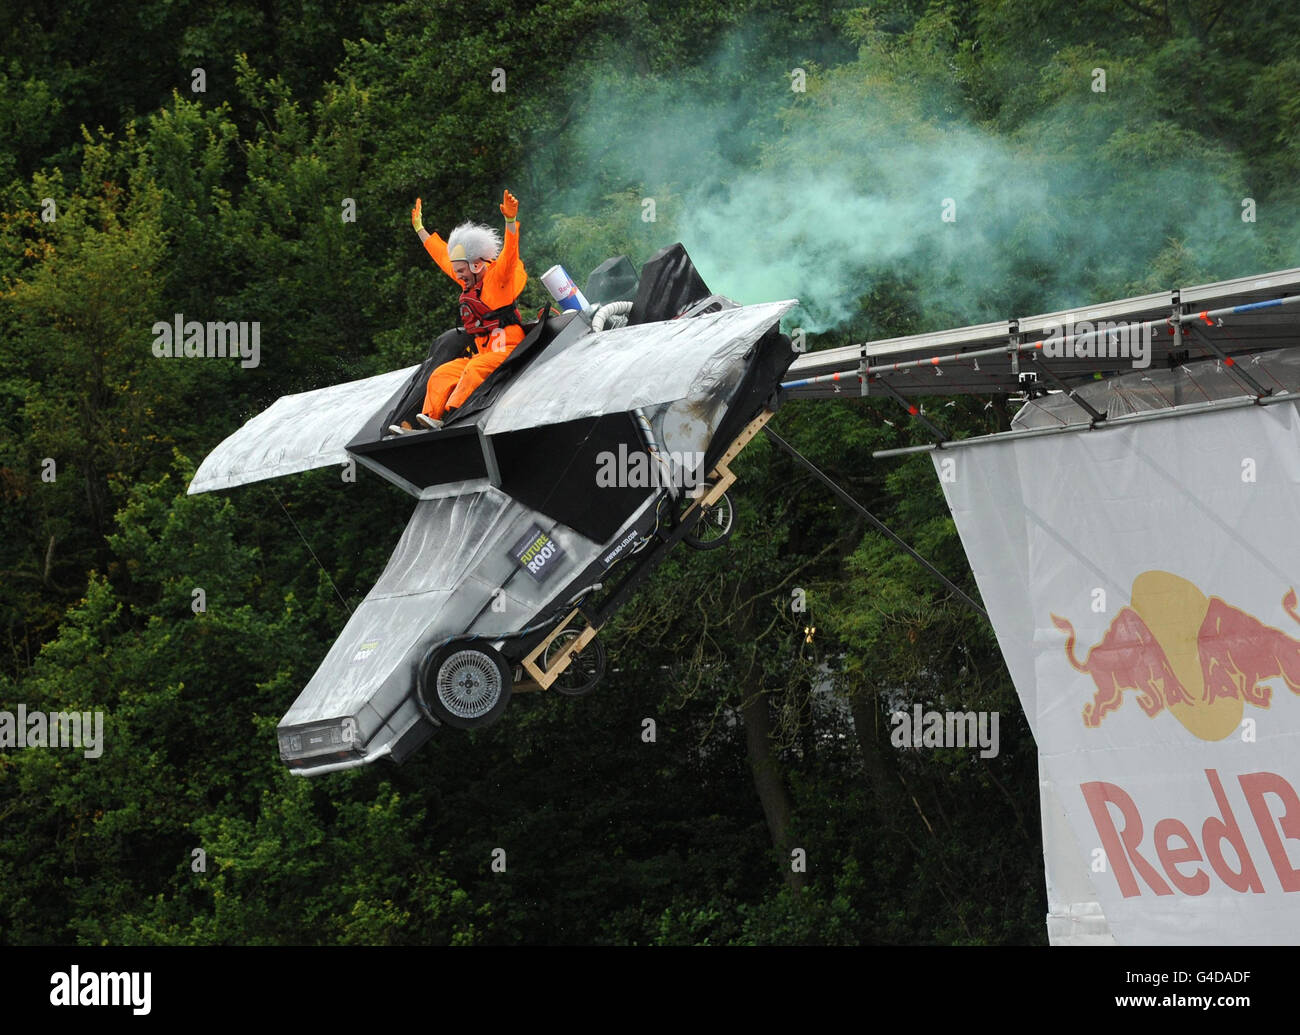 Doc Brown's Delorian takes off during the Red Bull Flugtag event in Roundhay Park, Leeds. Stock Photo